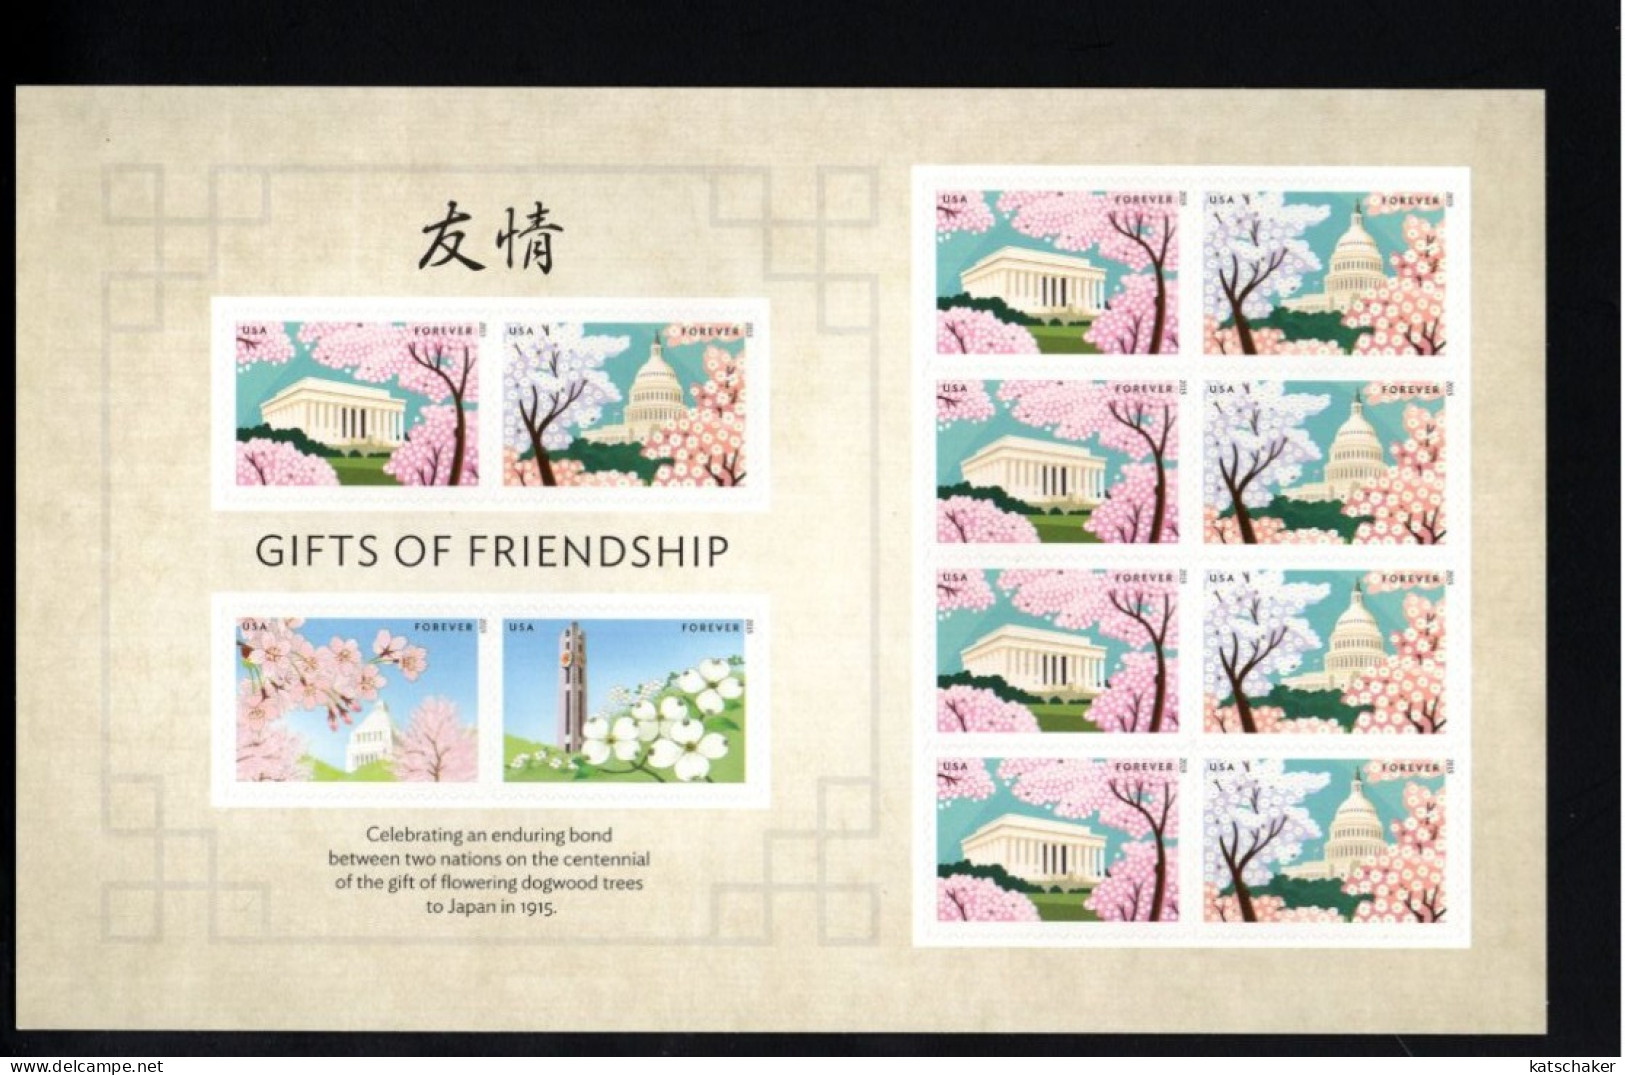 1856764803  2015  SCOTT 4982 TILL 4985 AS PANE (XX)  POSTFRIS MINT NEVER HINGED - GIFTS OF FRIENDSHP - CHERRY TREES - Unused Stamps